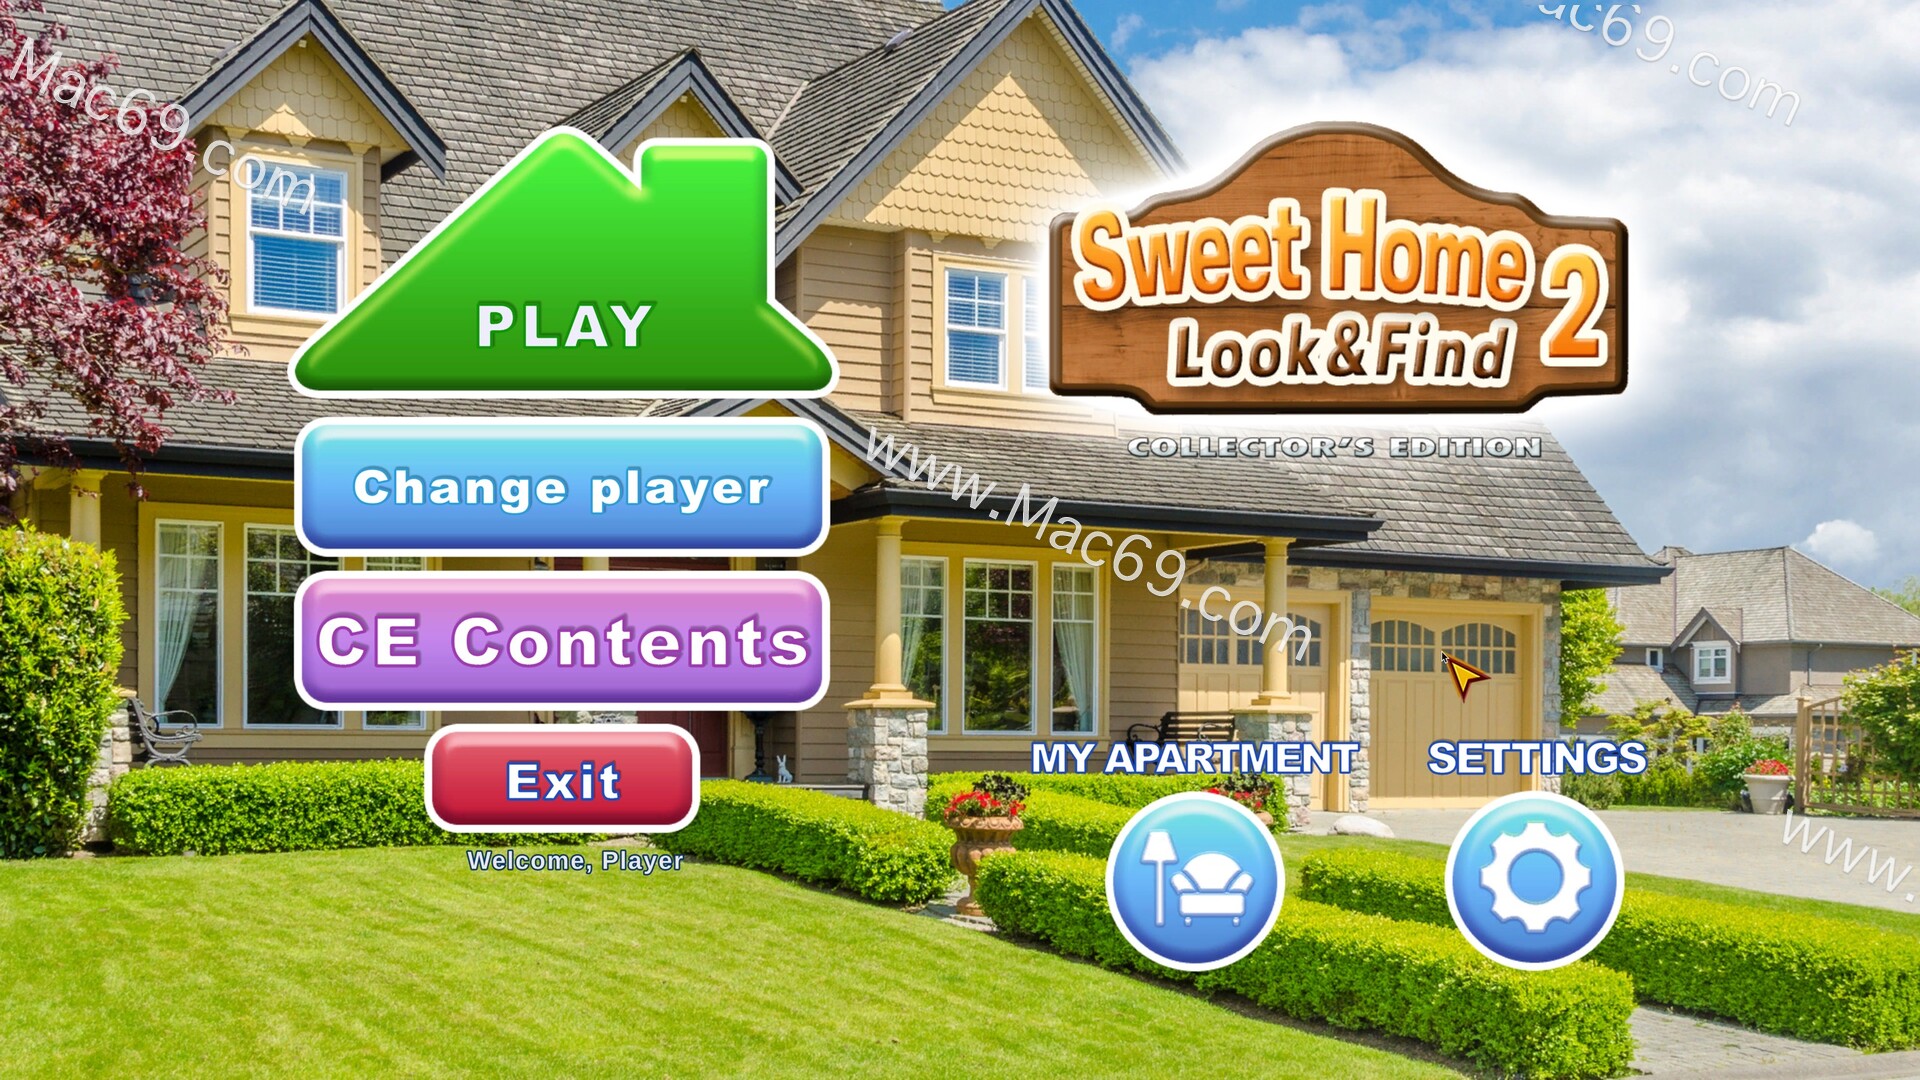 Sweet Home Look and Find 2 Collector‘s Edition for Mac(找物品休闲游戏)